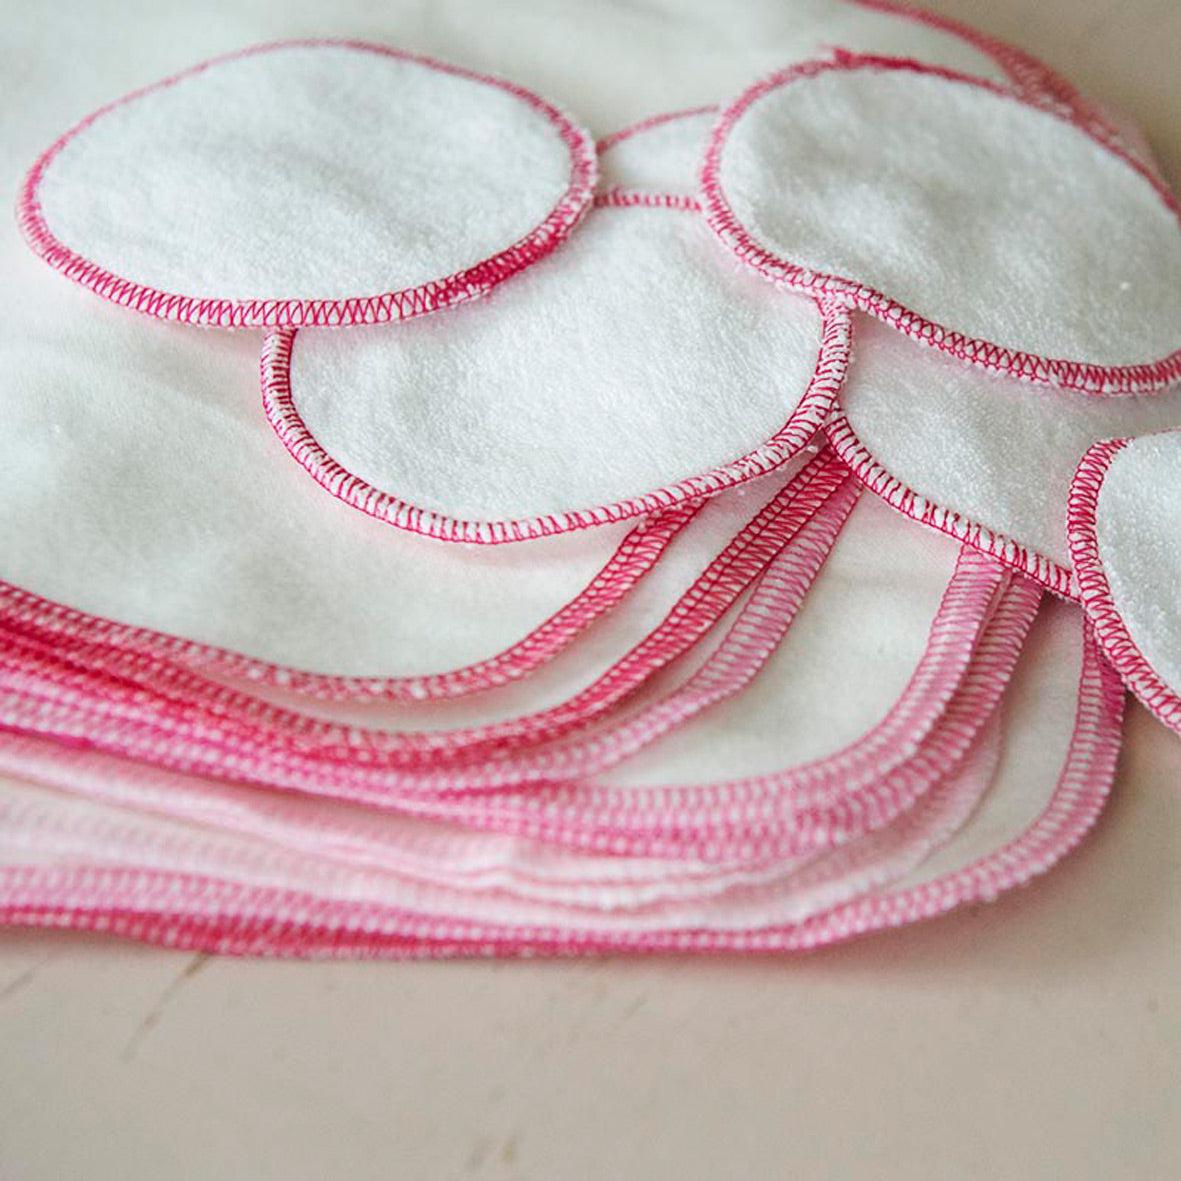 ImseVimse Reusable Cotton Wipes Pink Display